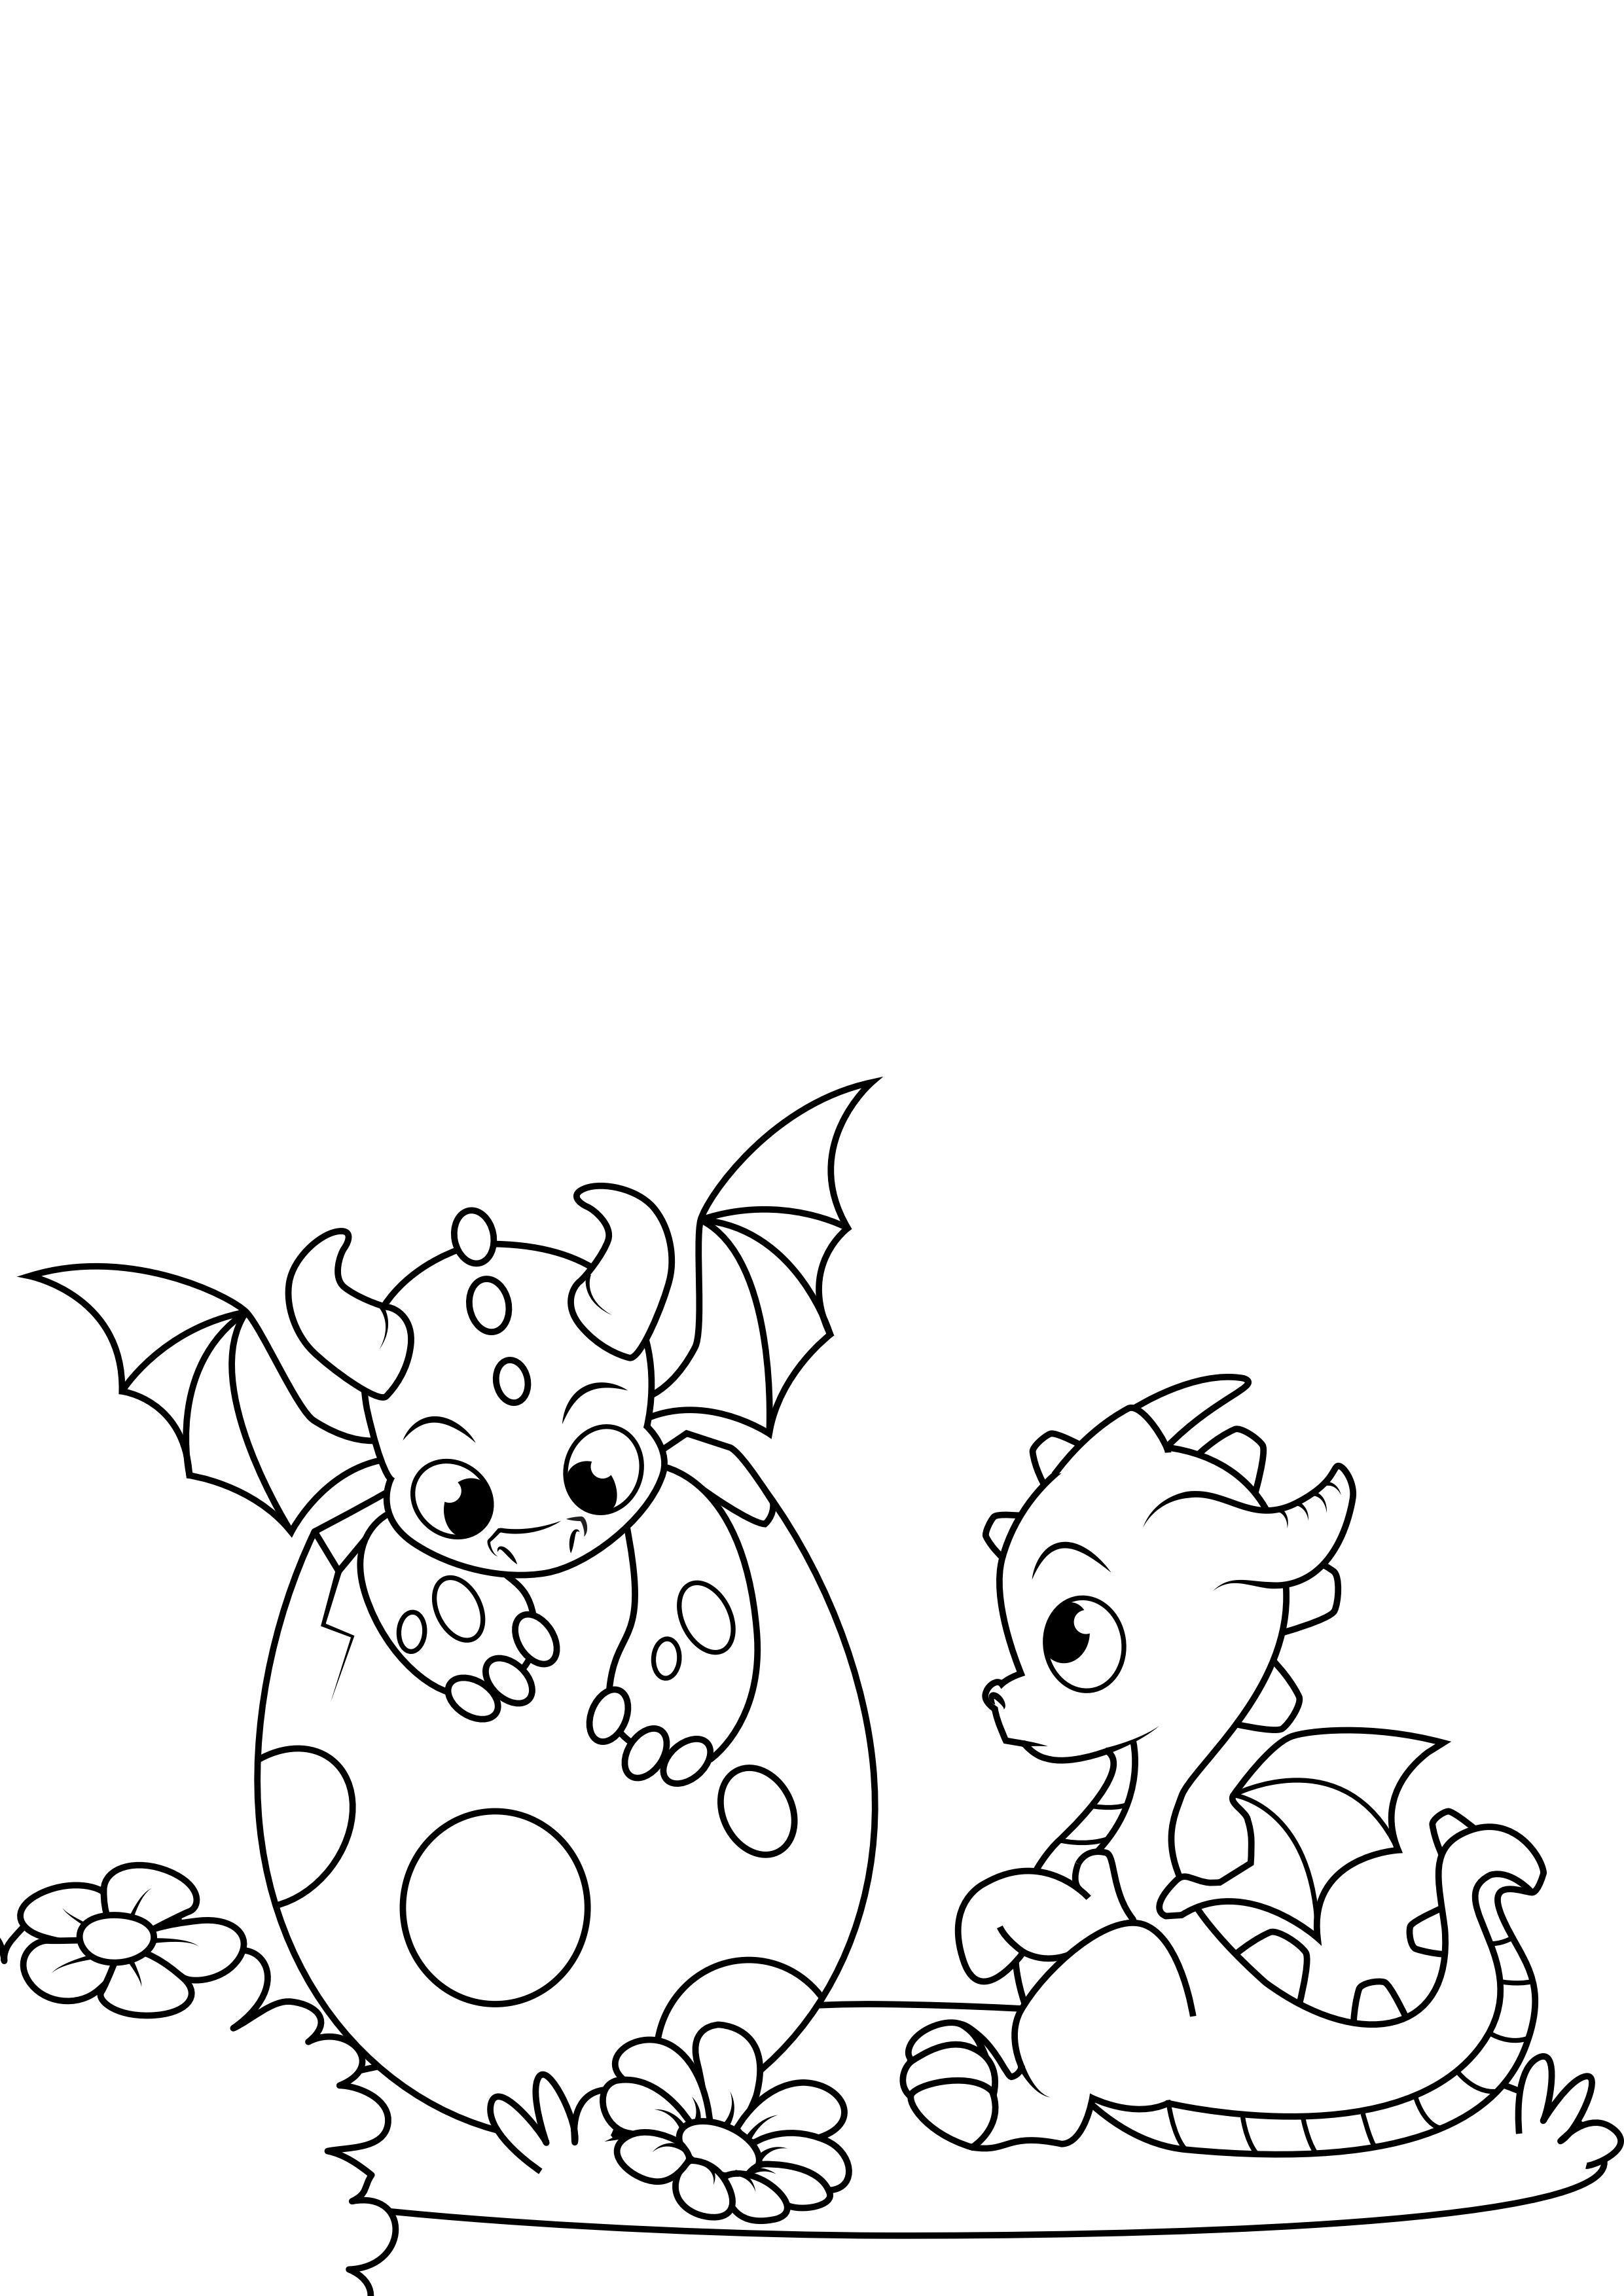 Coloring page dragons from egg